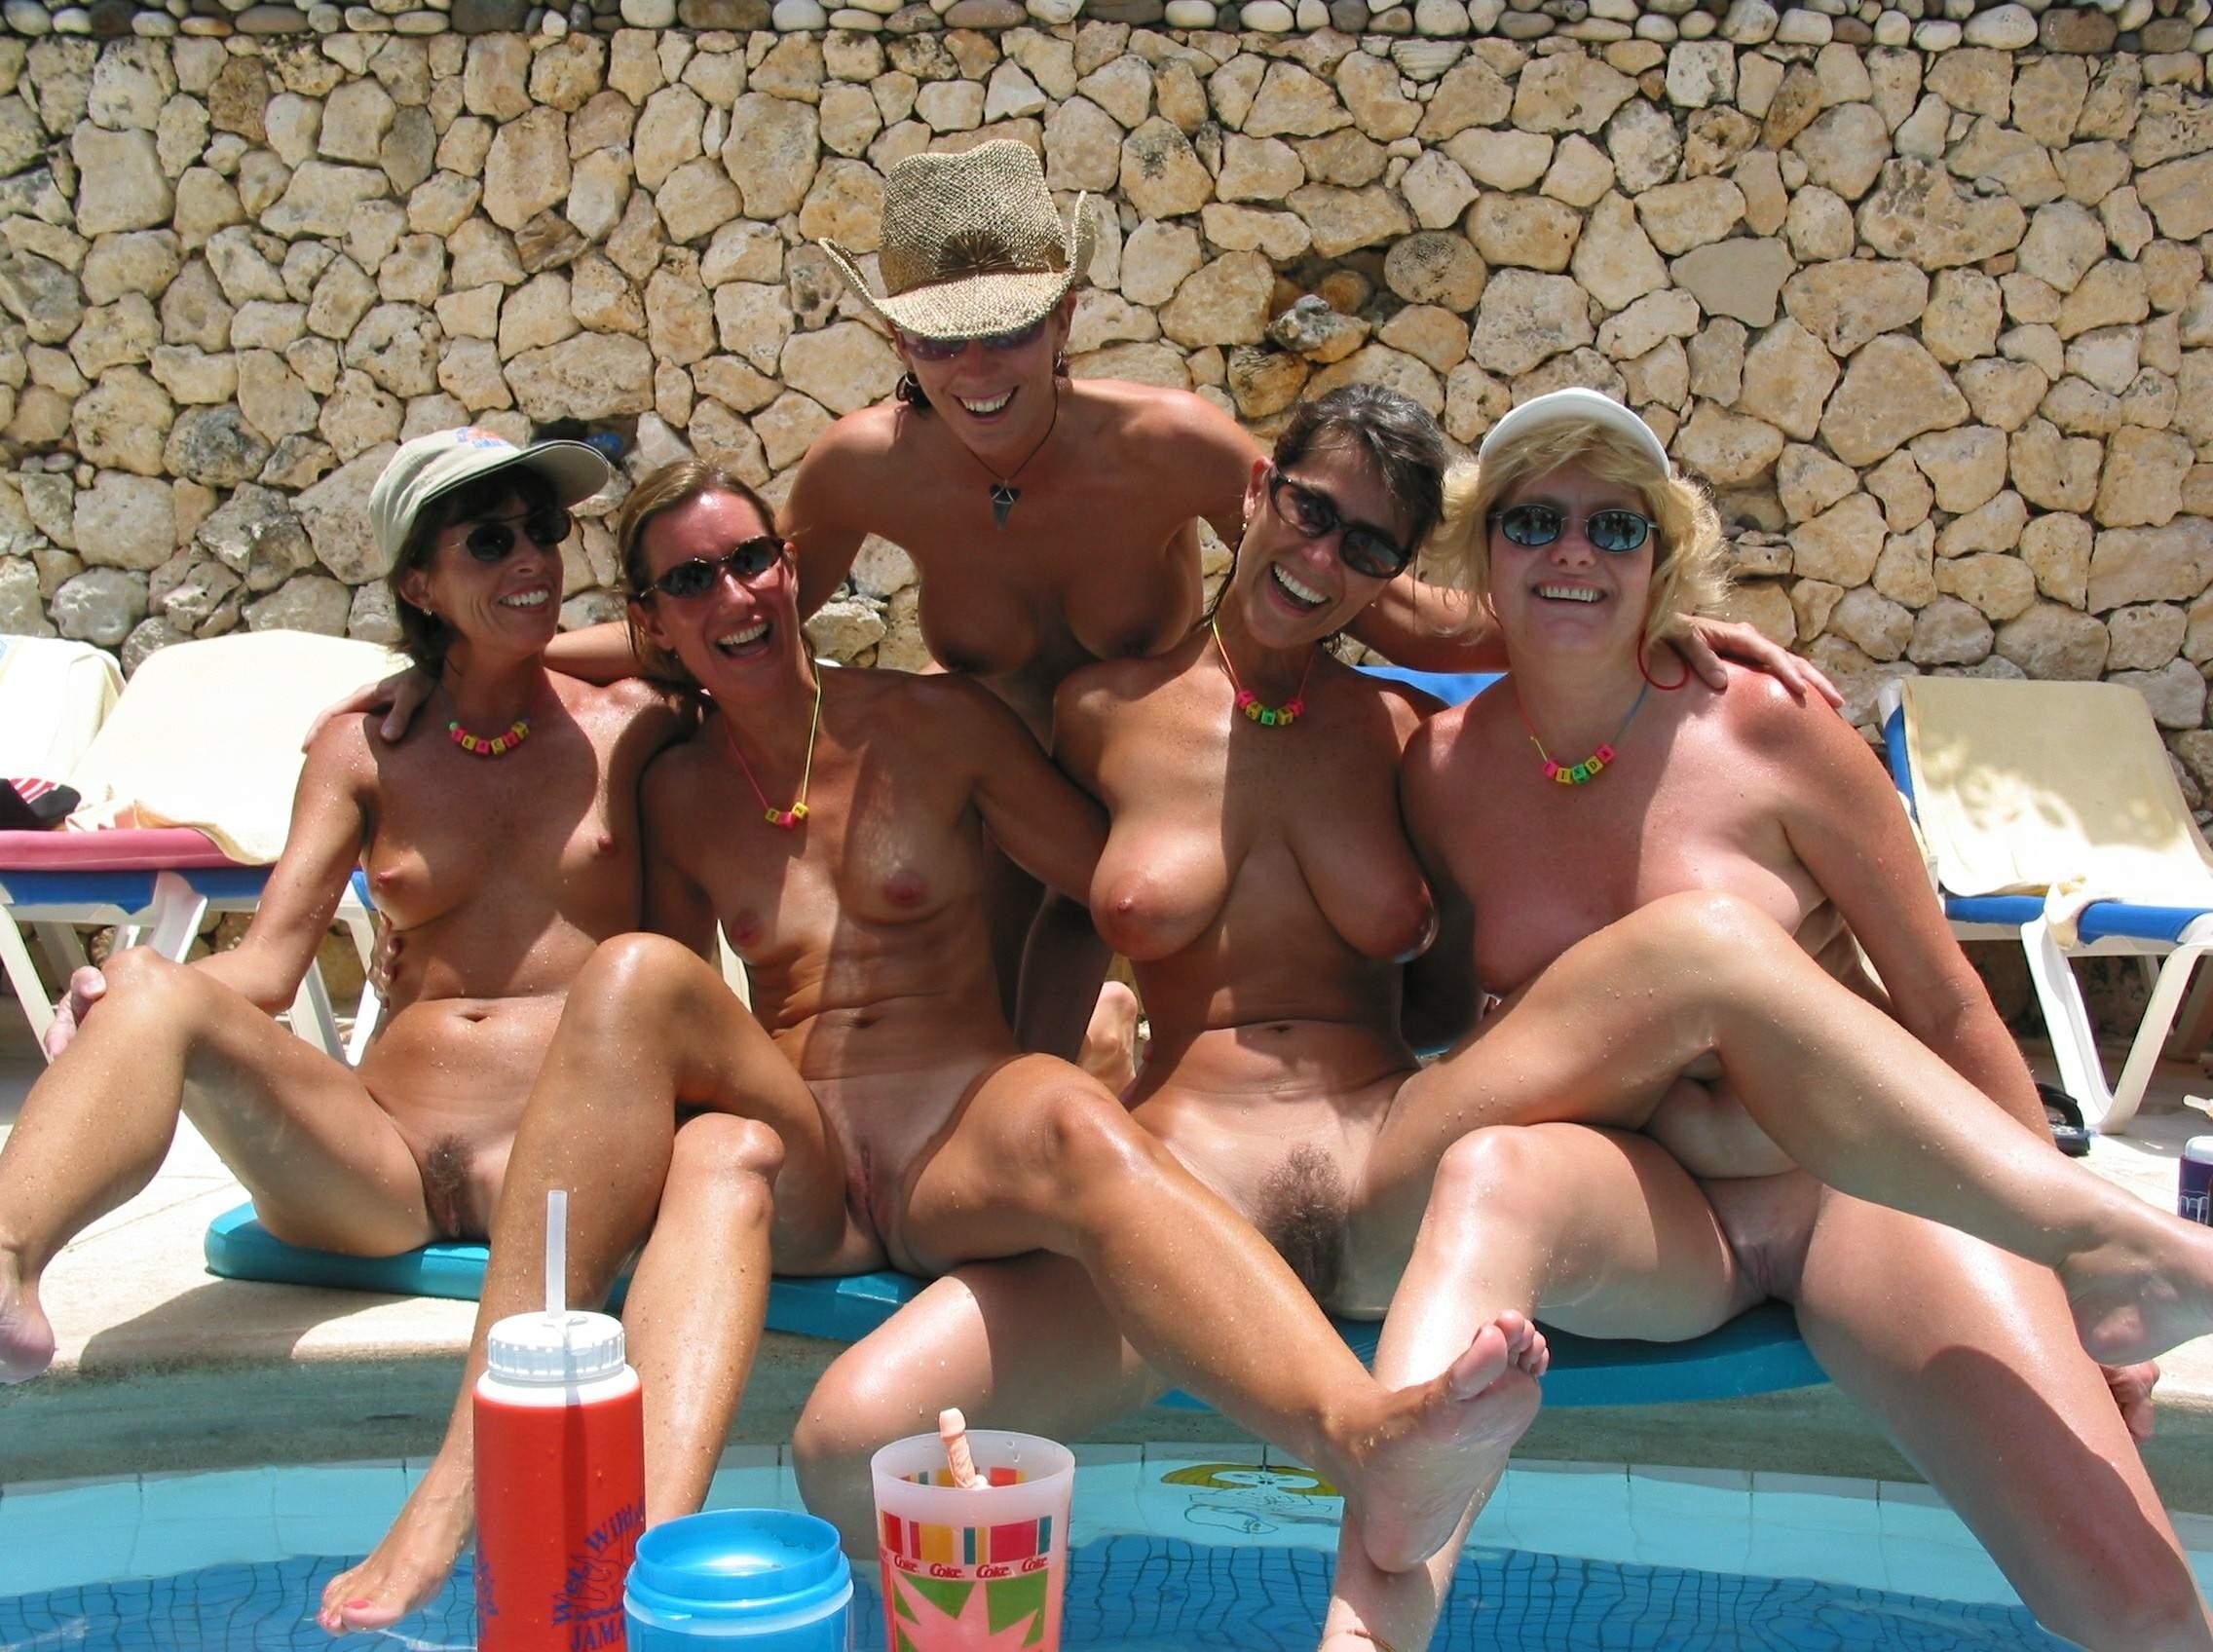 pic of Selina together with her horny gfs near the pool